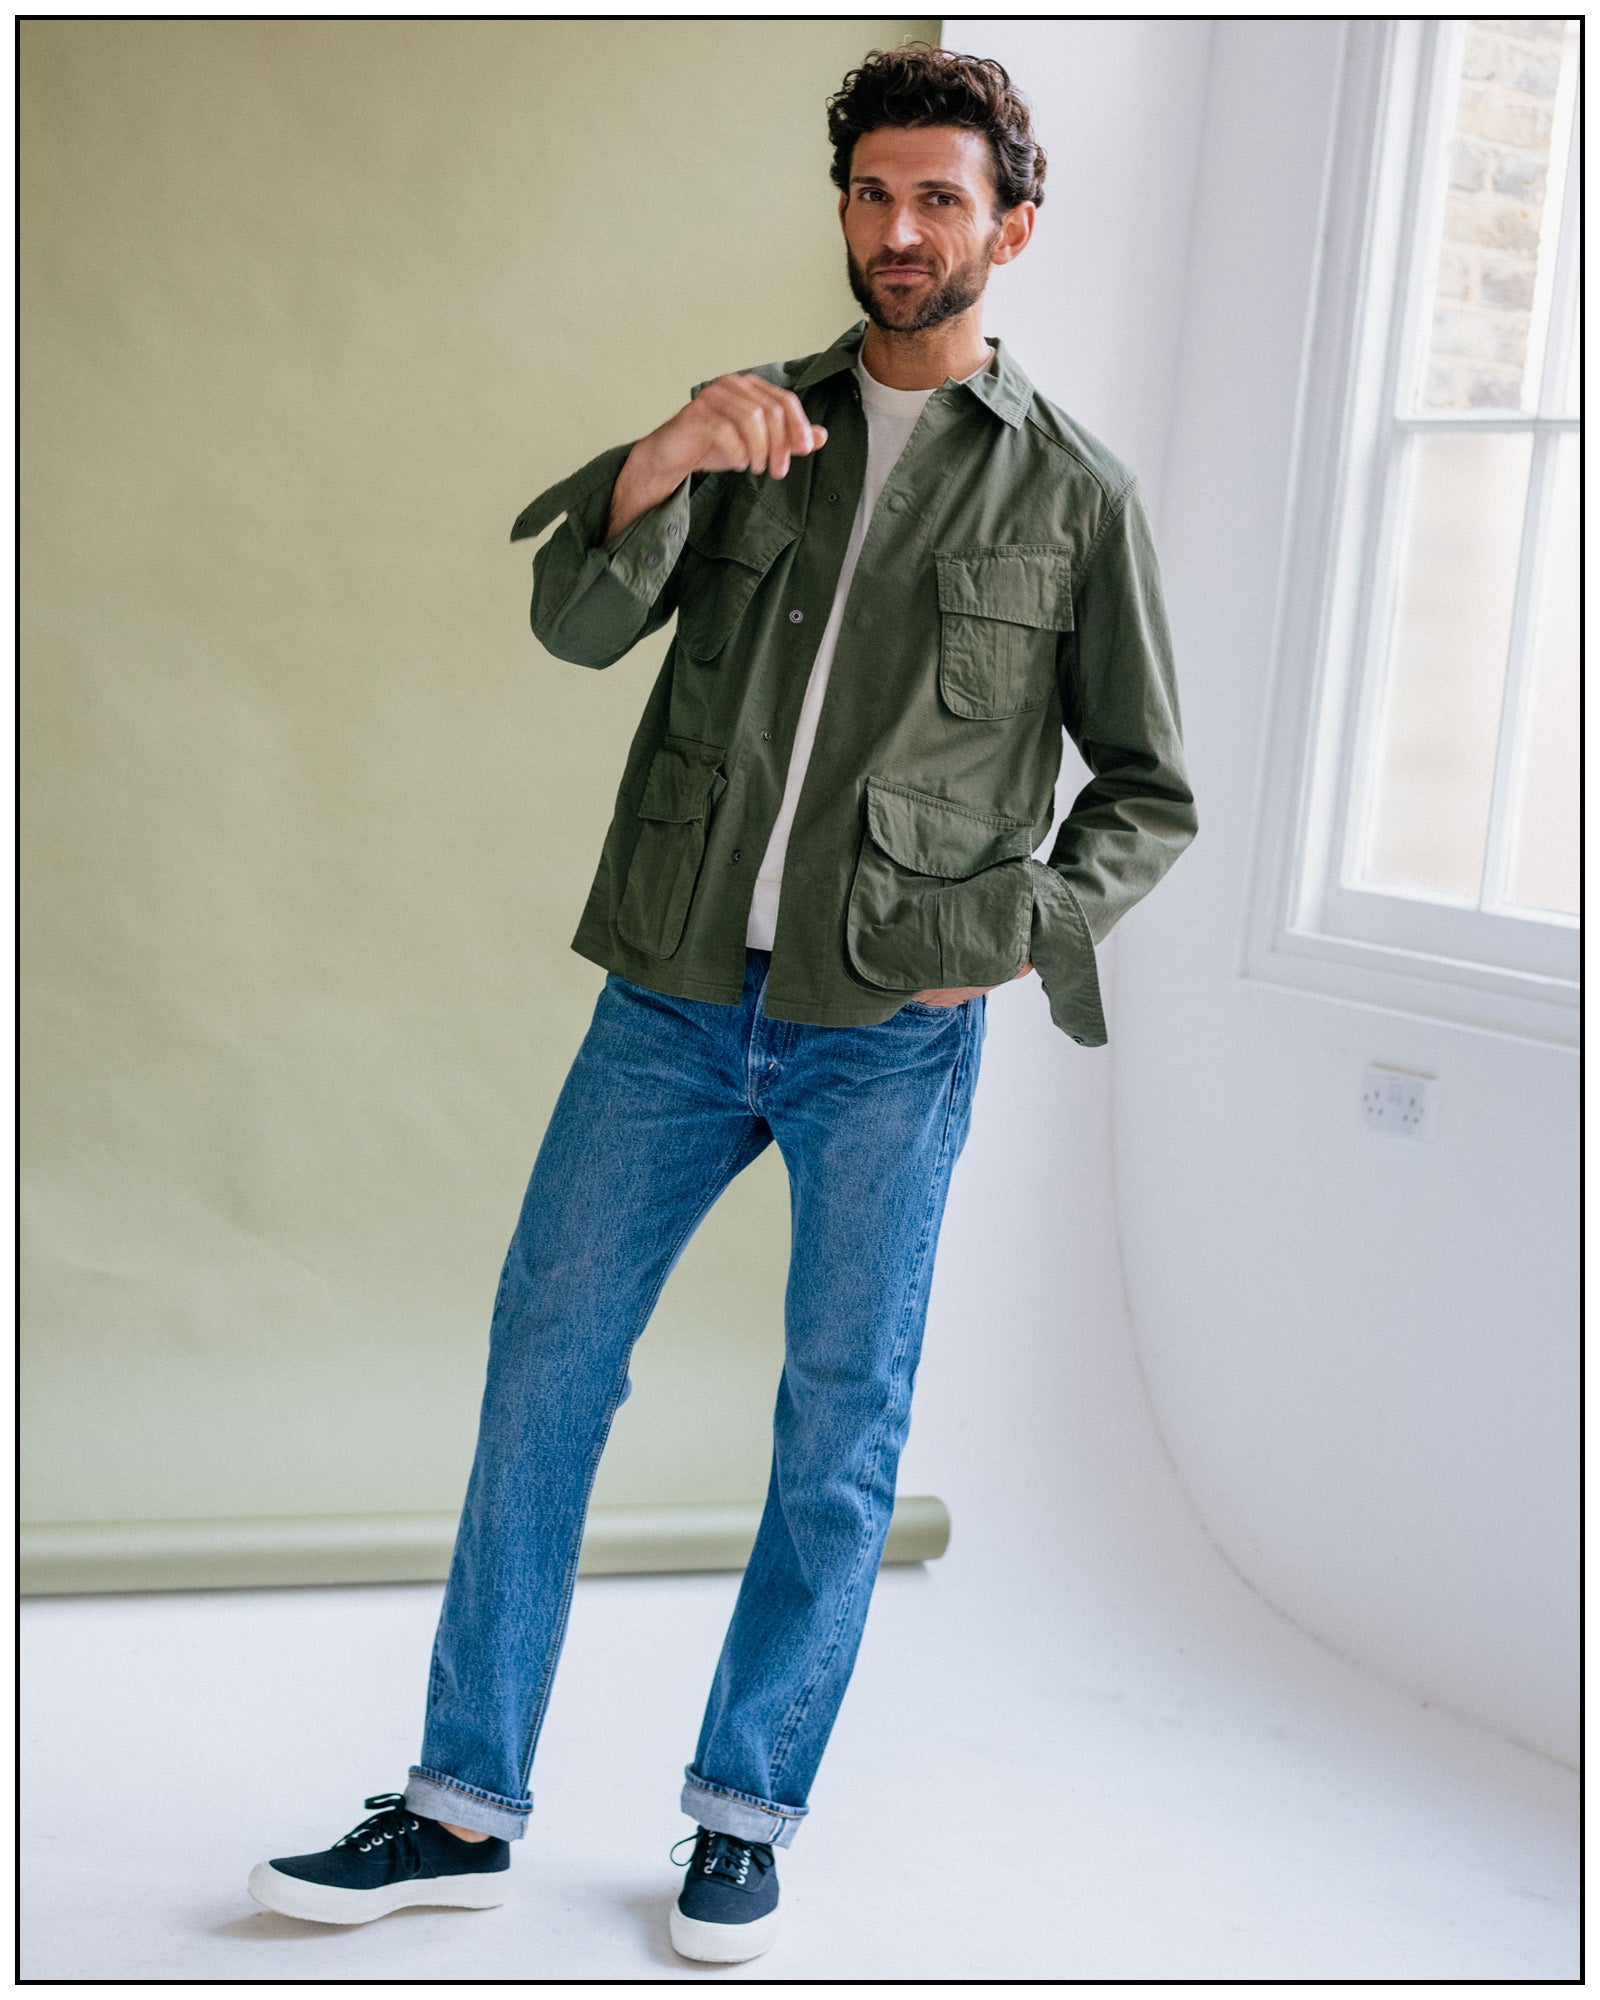 Lightweight Jackets For Spring - The Journal | Trunk Clothiers